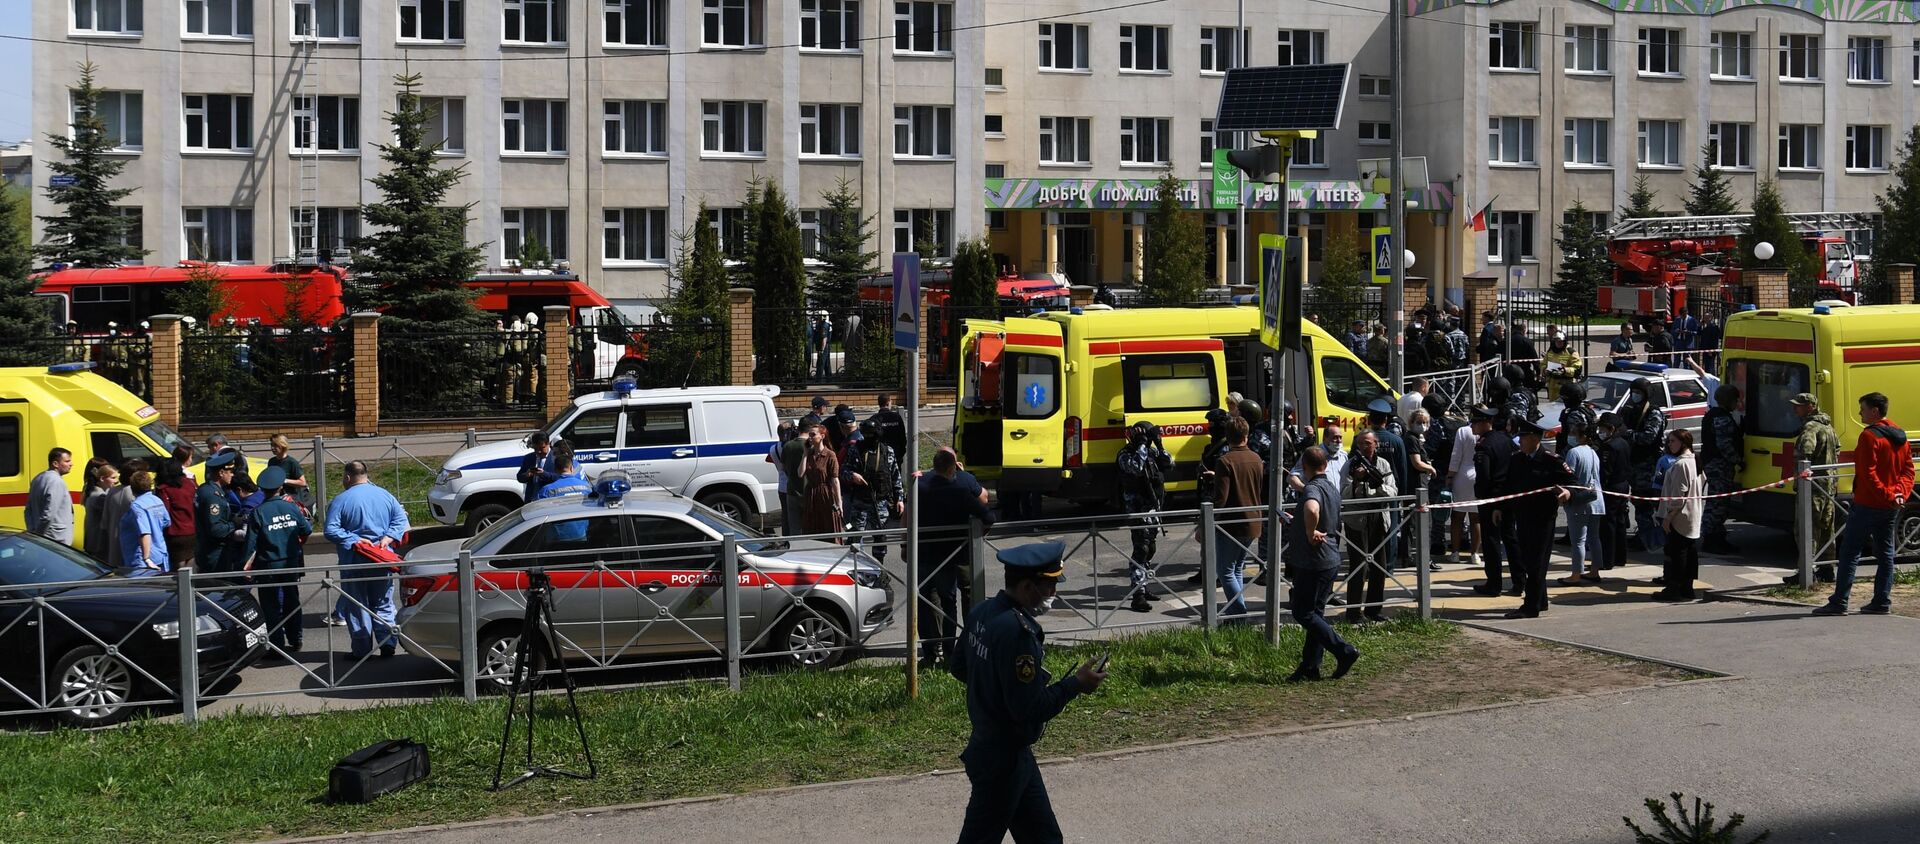 The situation at a school in Kazan, where unknown people opened fire. - Sputnik International, 1920, 11.05.2021